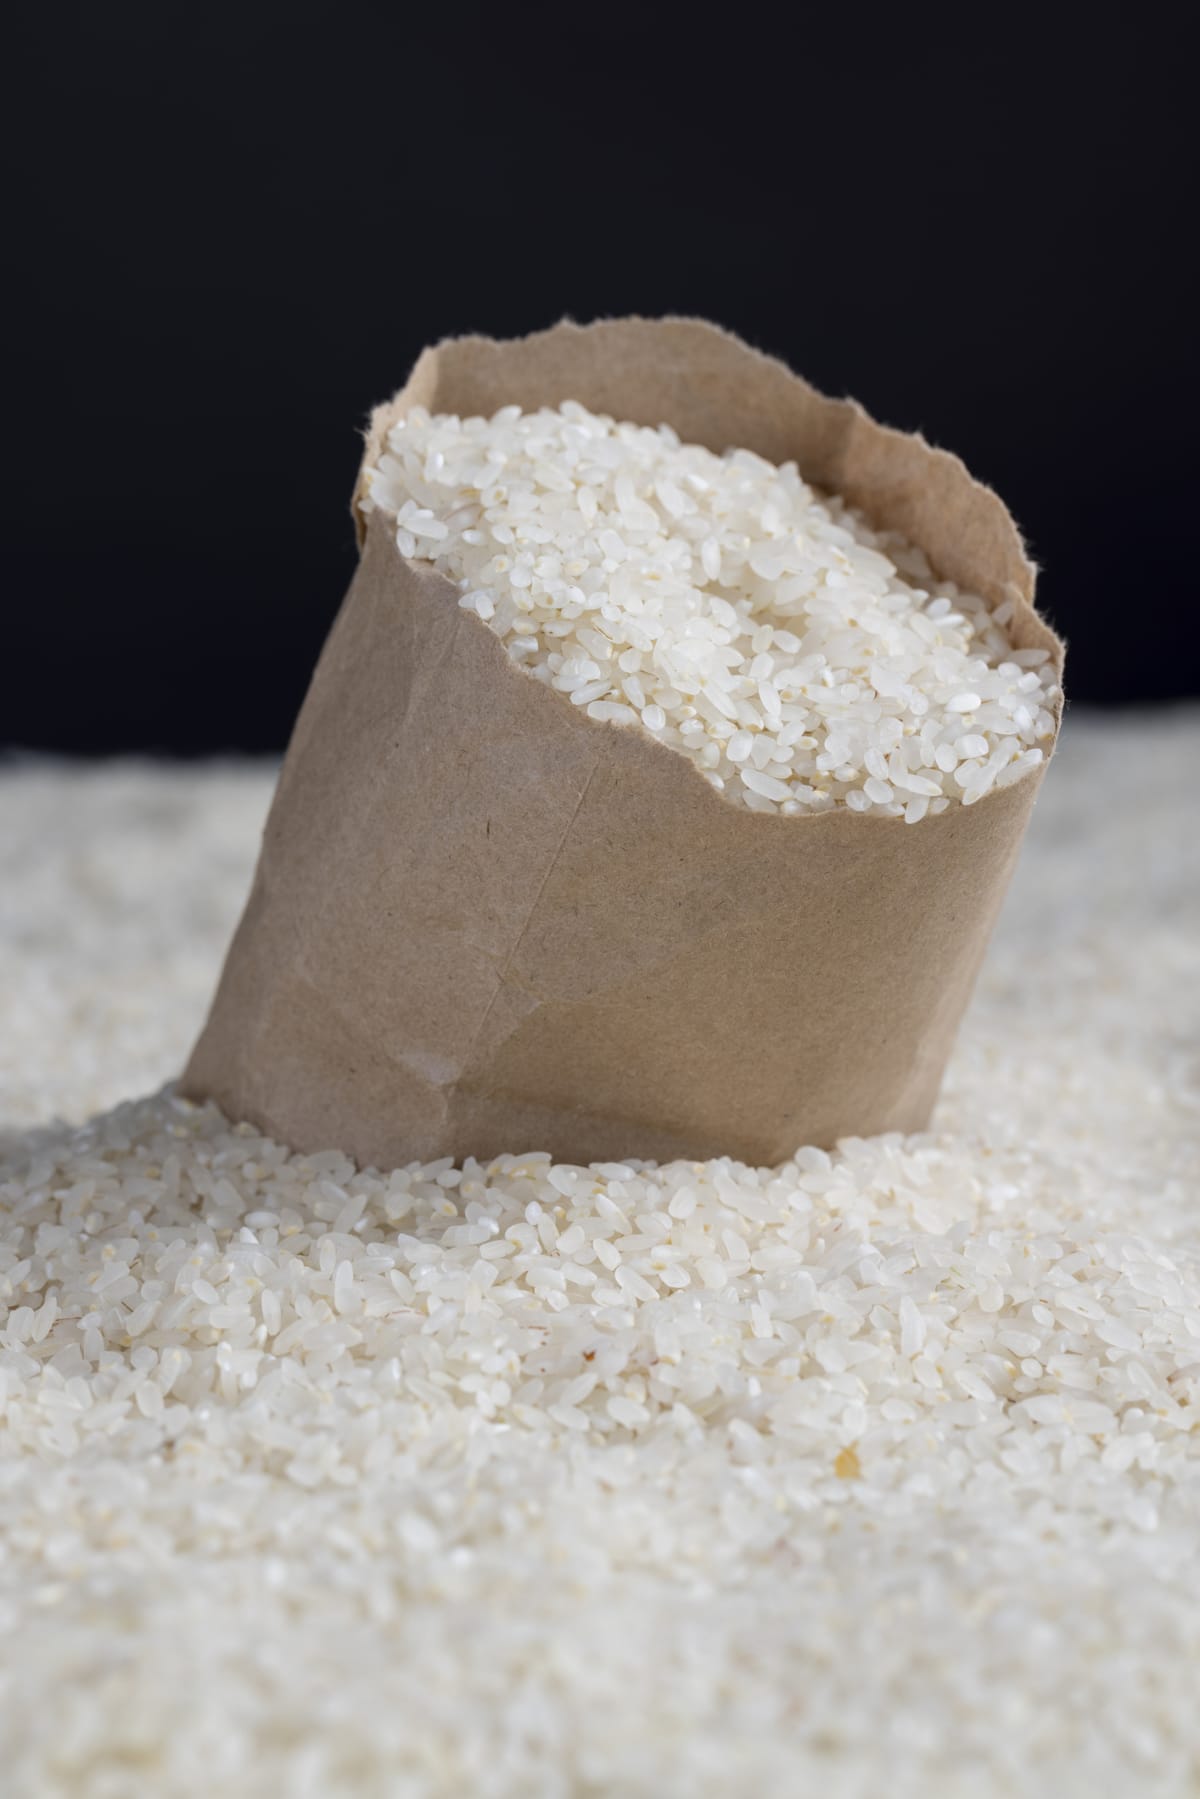 a pile of white rice in a paper bag and on the table, white uncooked rice grains in a paper bag on the table